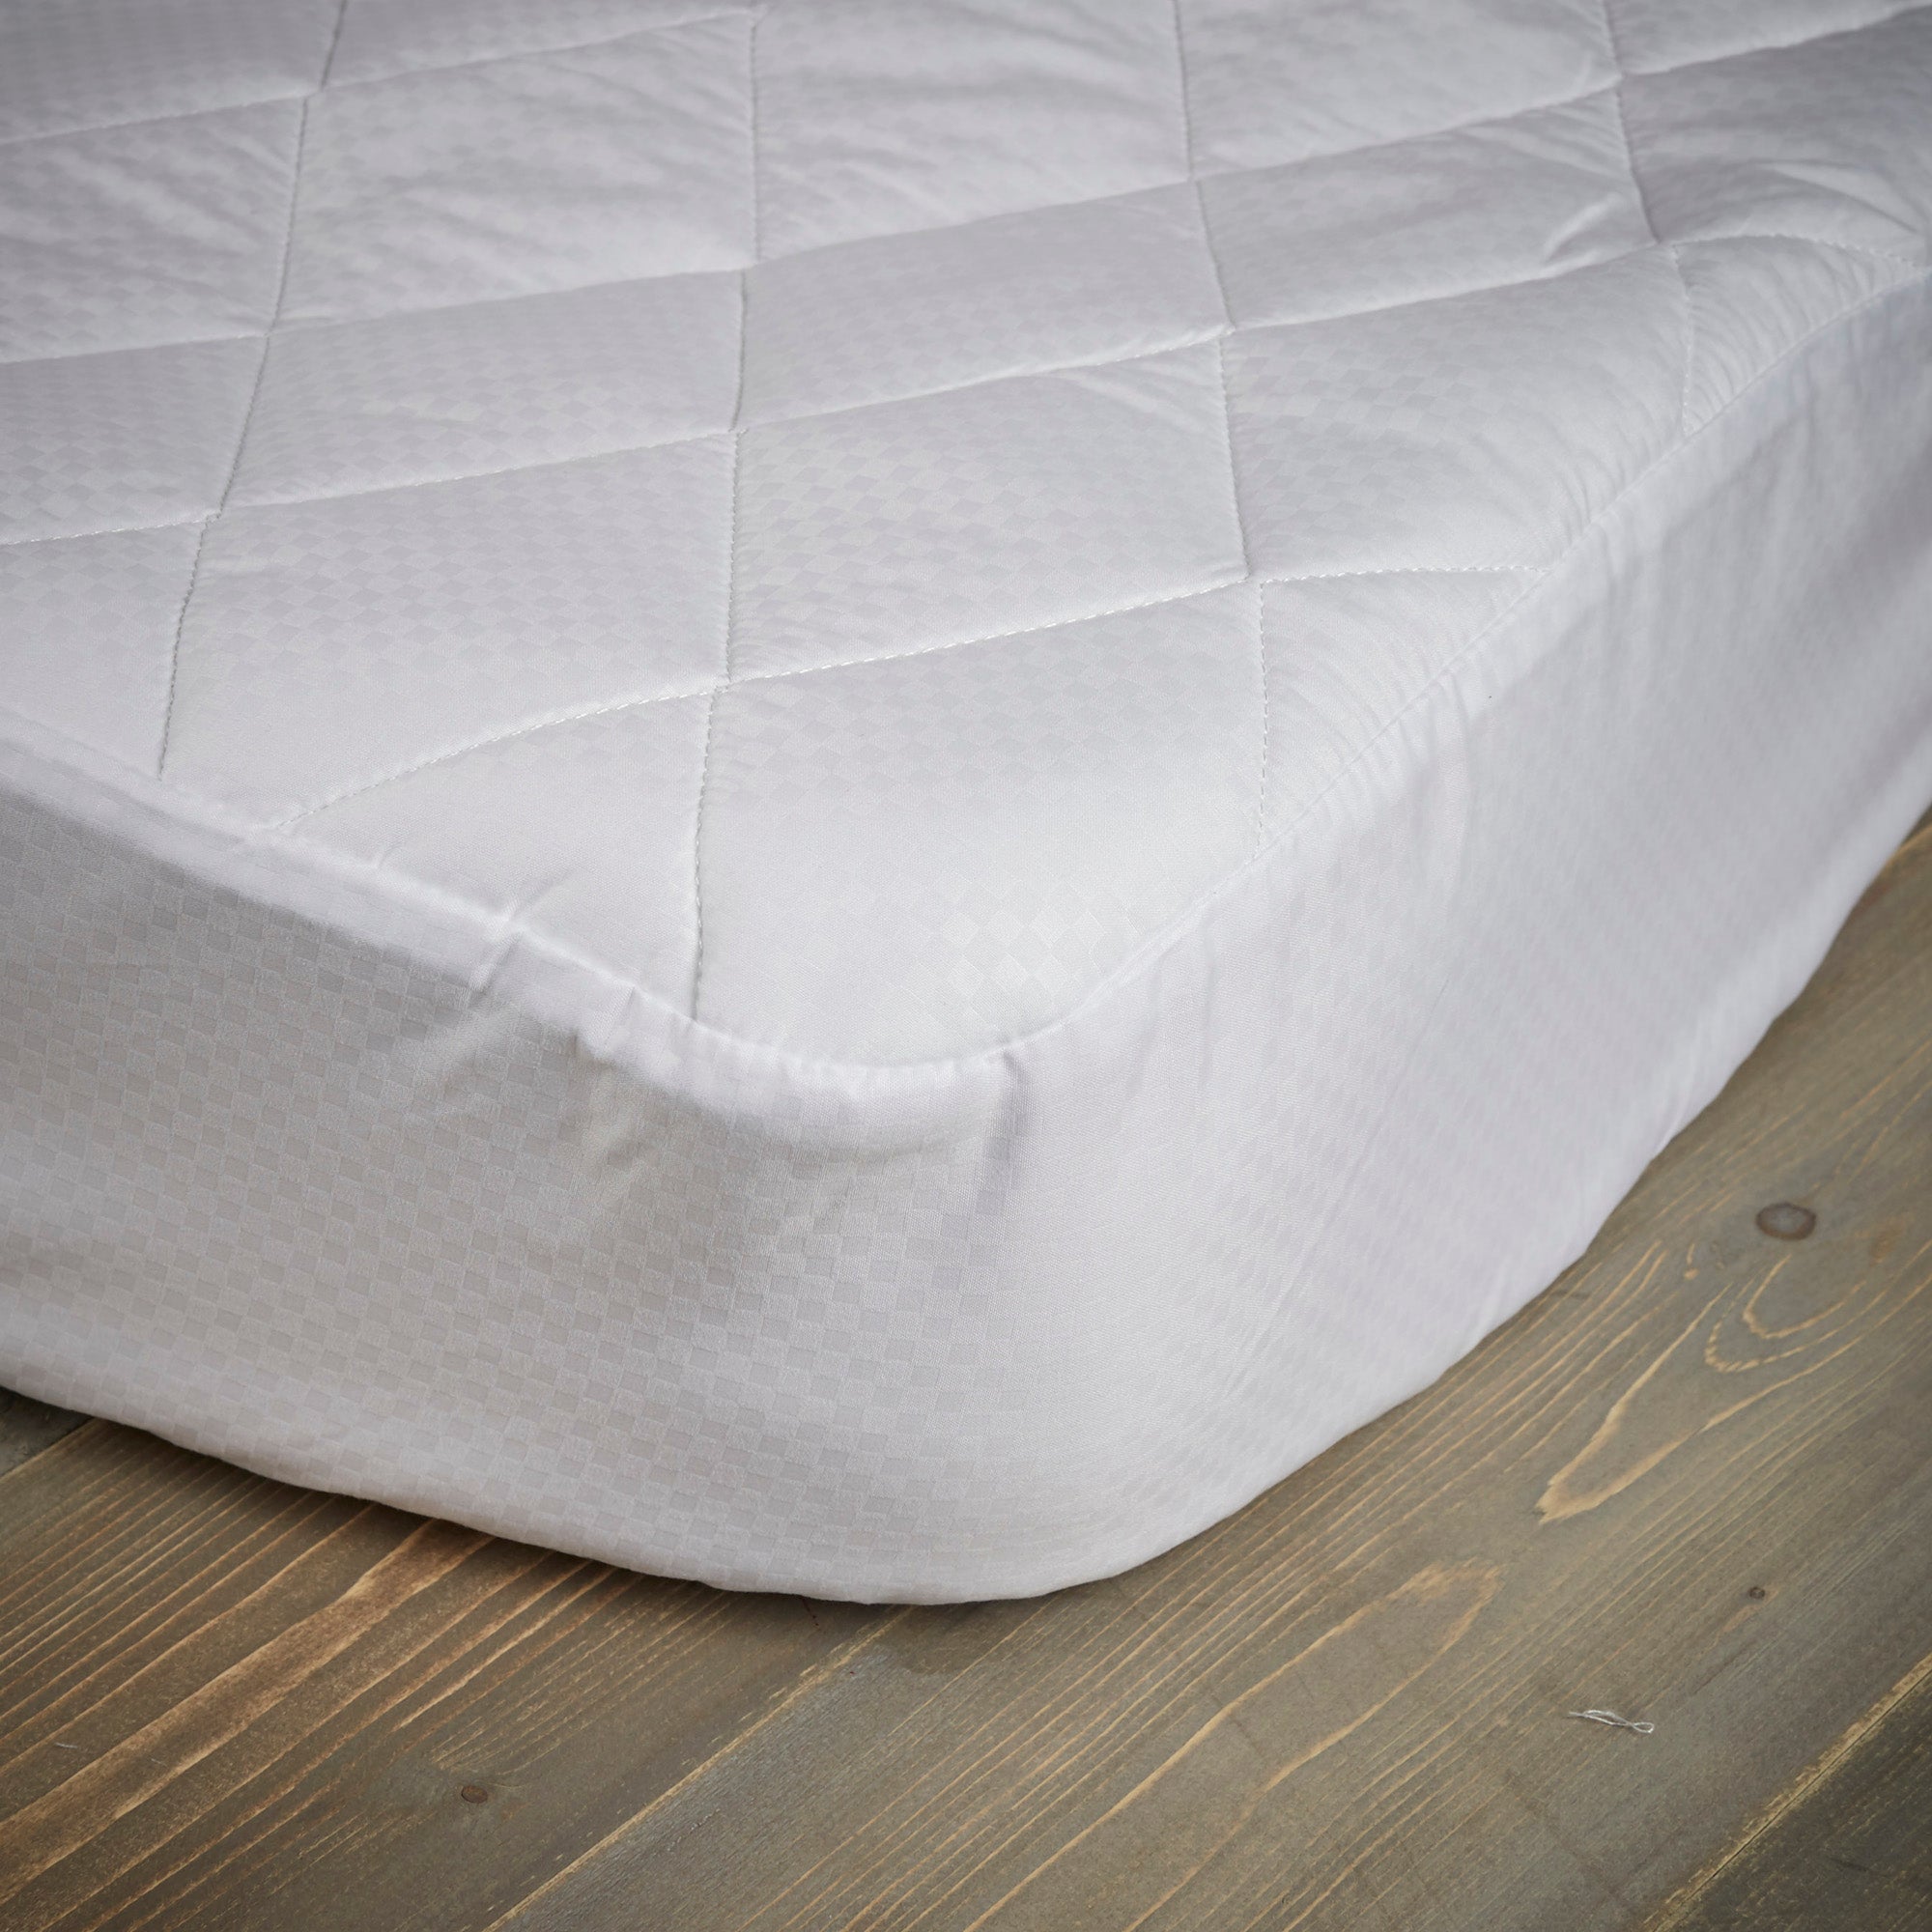 Fogarty Soft Touch Mattress Protector